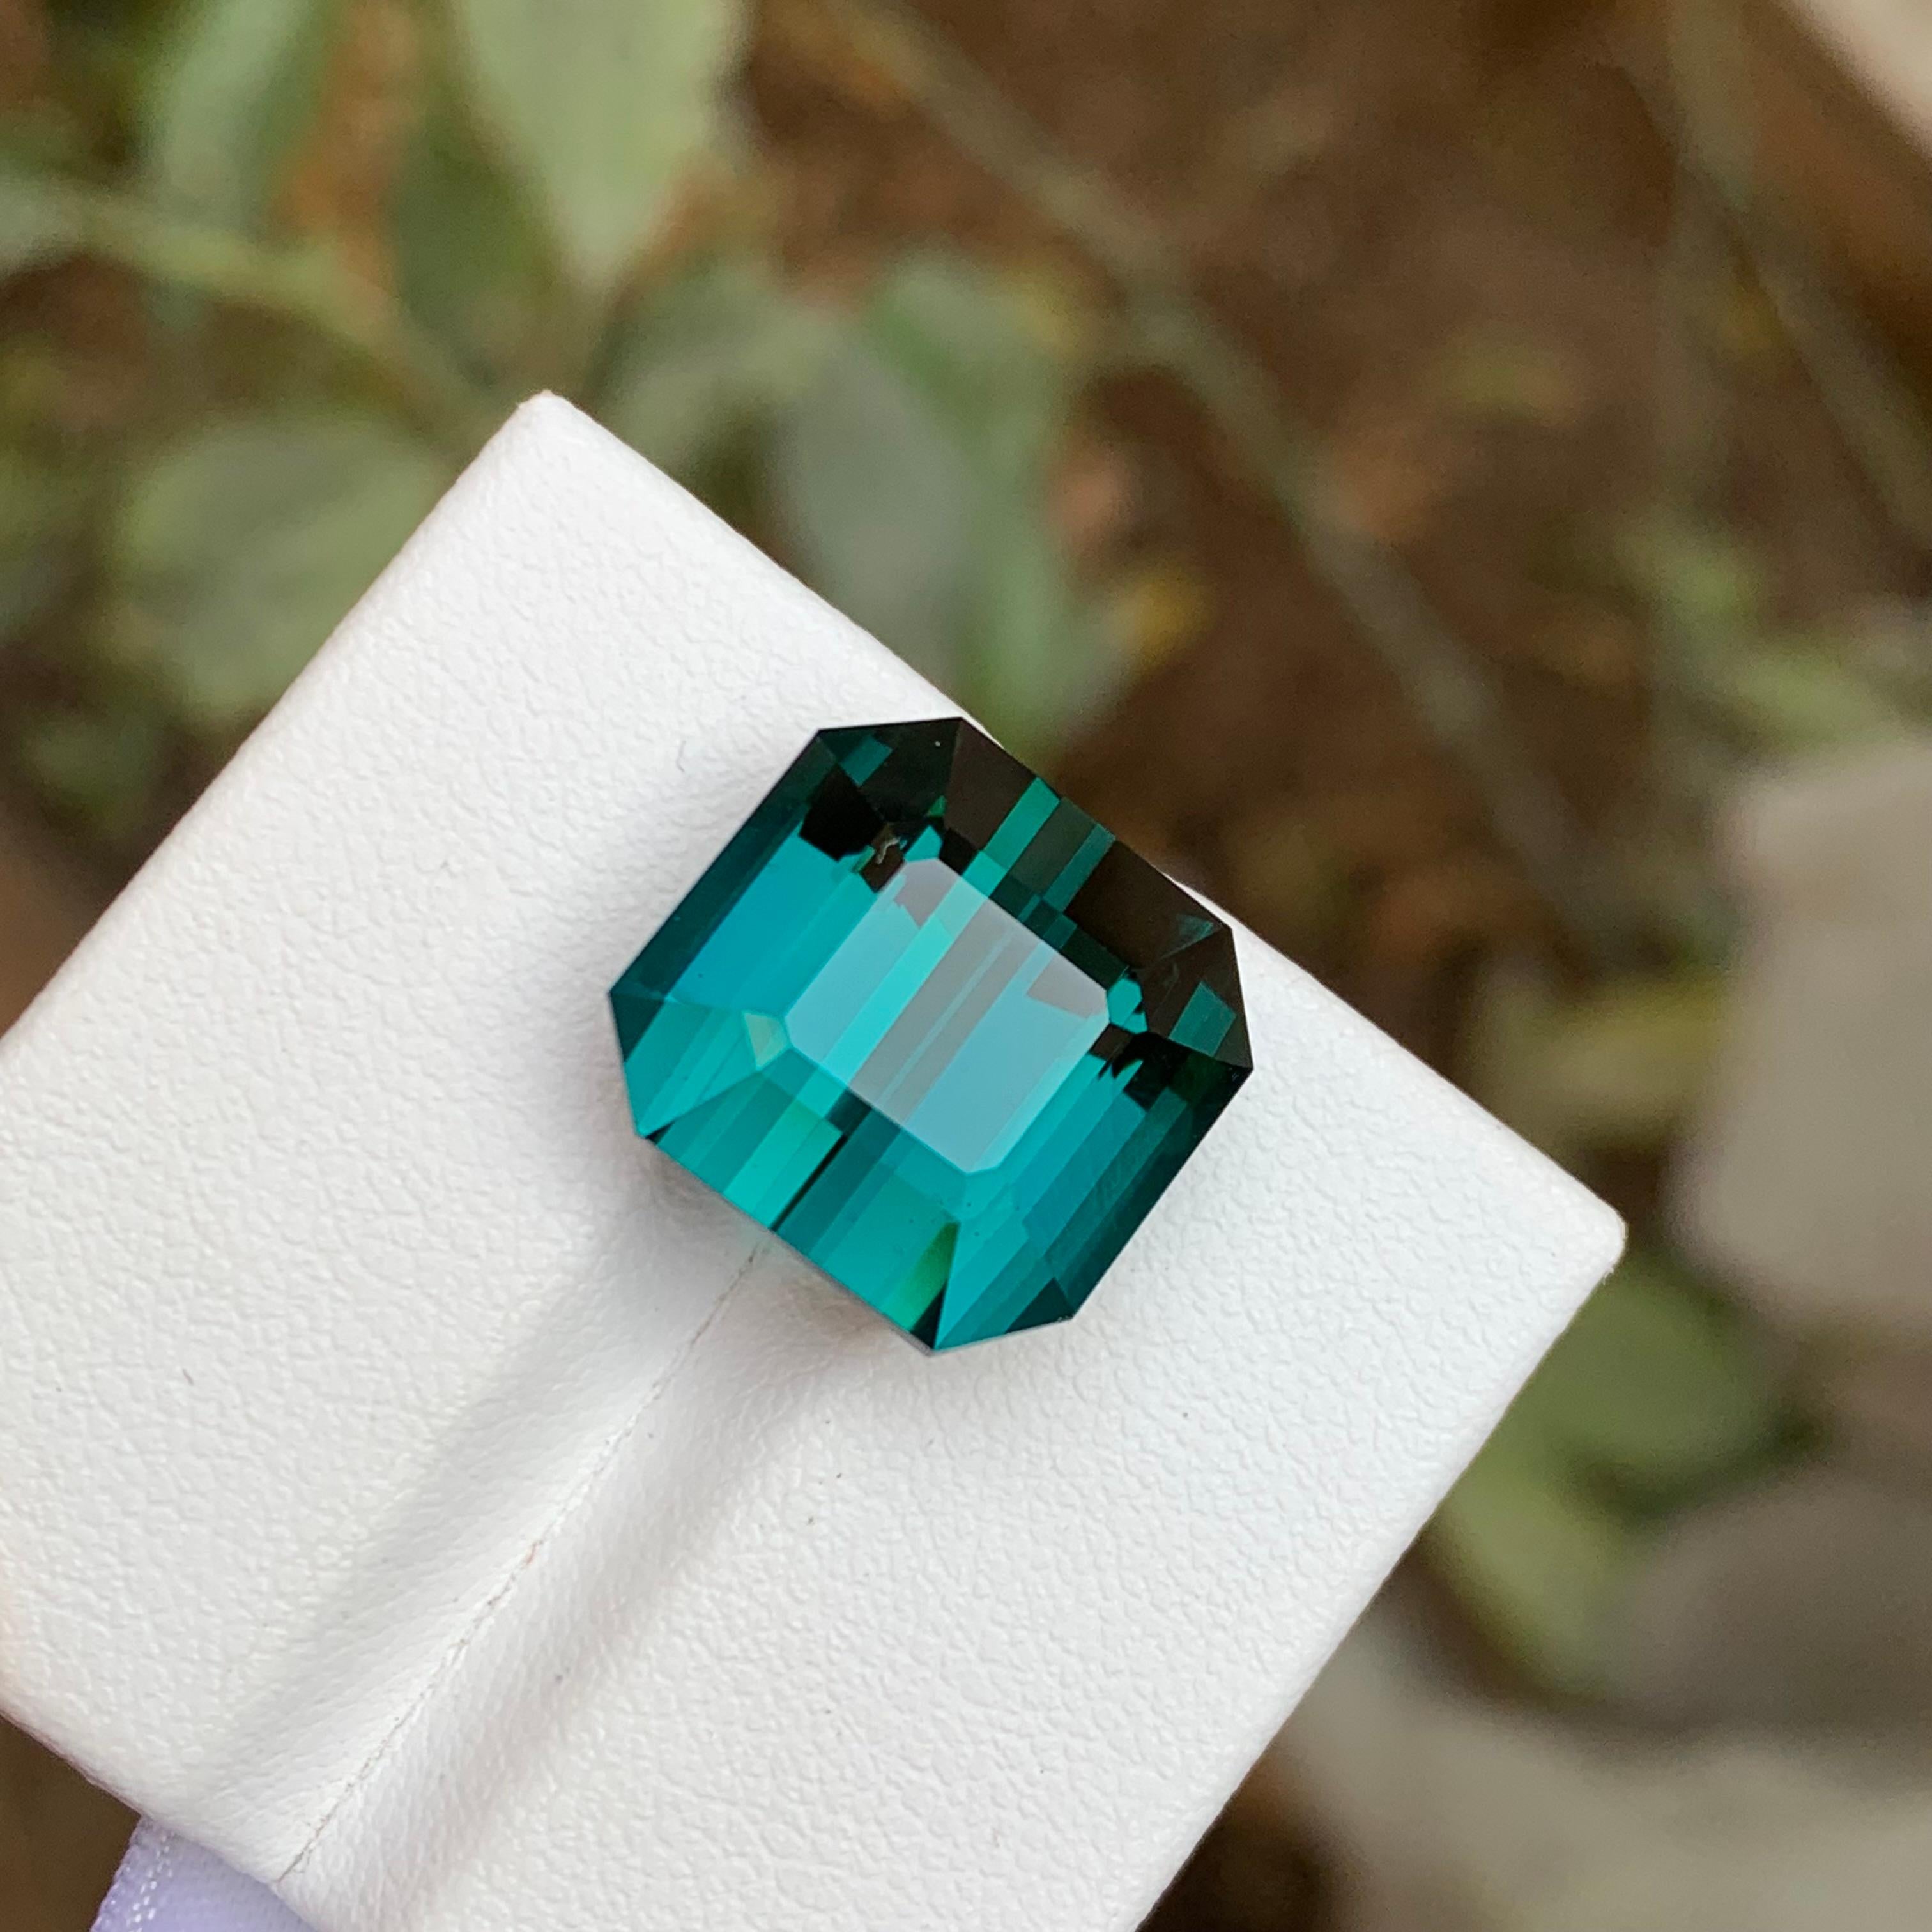 Rare Teal Blue Flawless Tourmaline Gemstone, 15.30 Ct Emerald Cut-Ring/Pendant For Sale 9